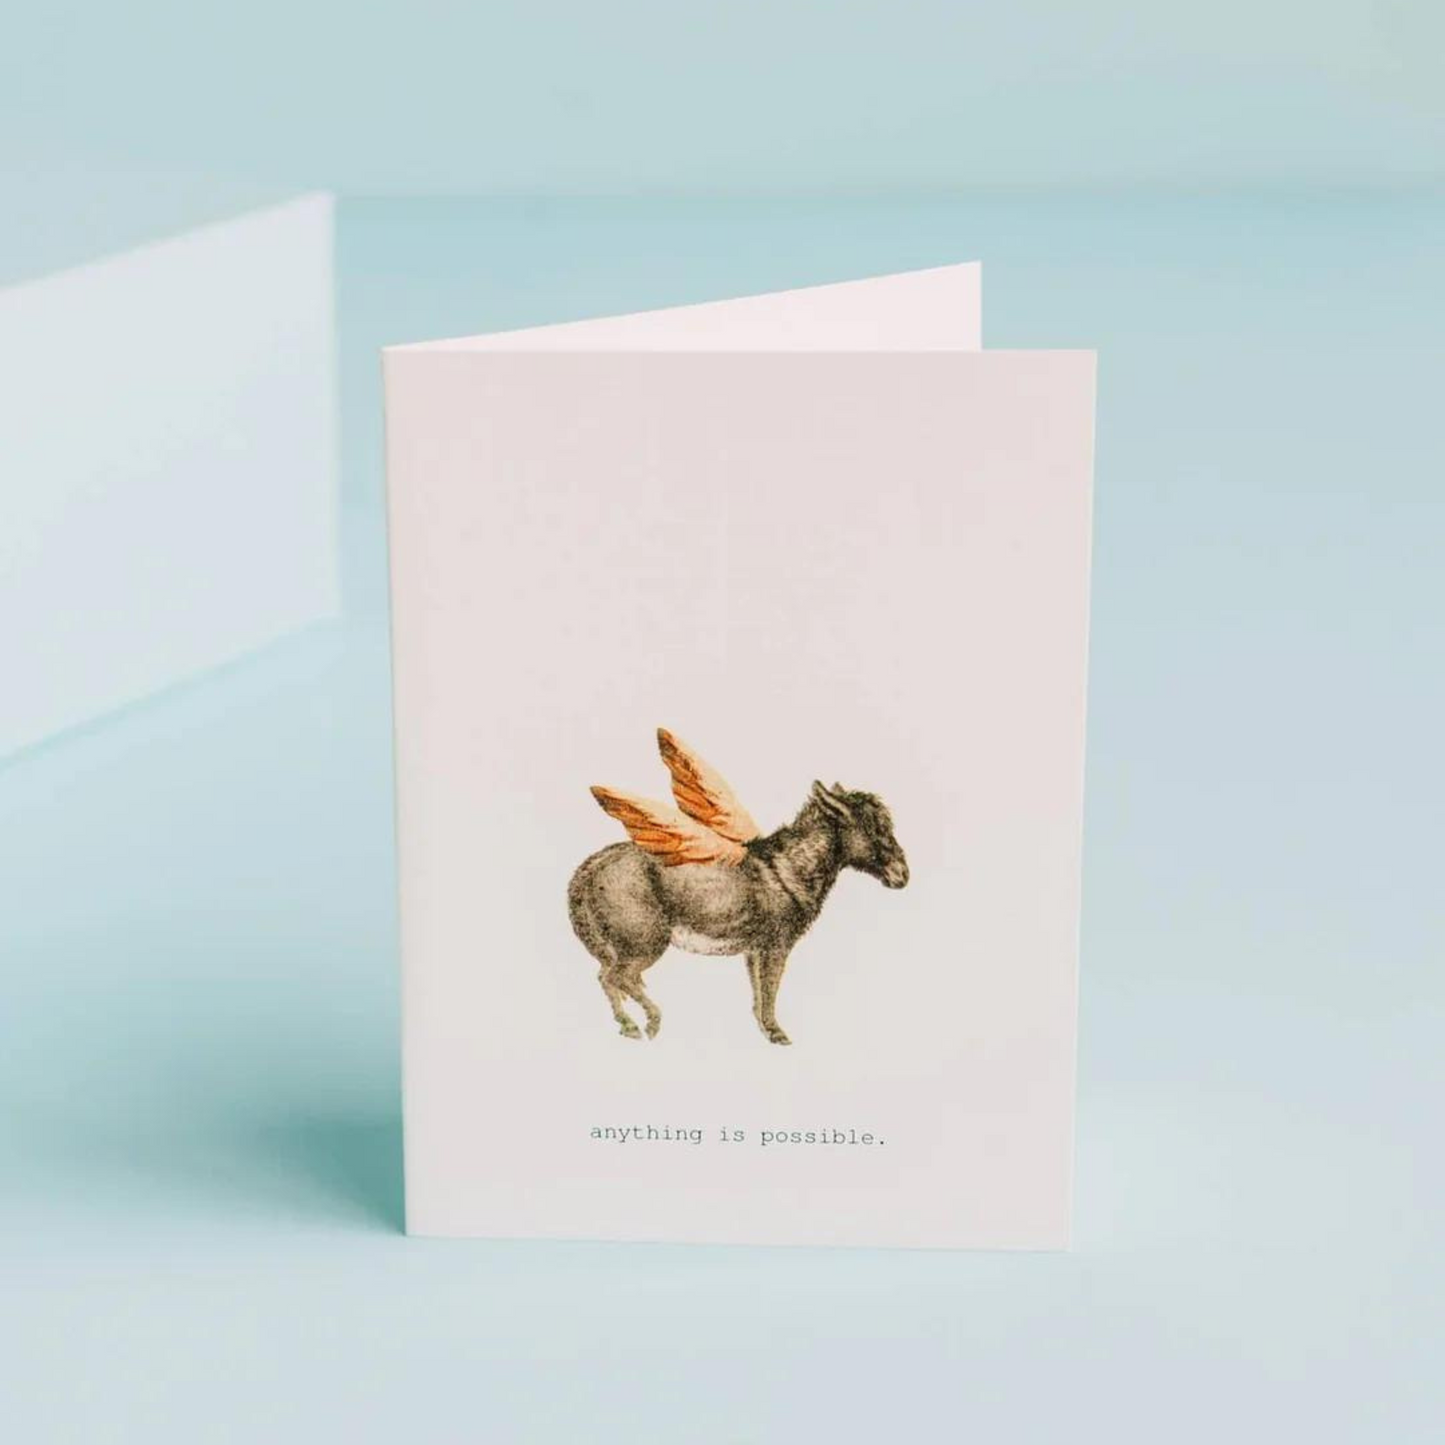 TokyoMilk - Anything is Possible Greeting Card